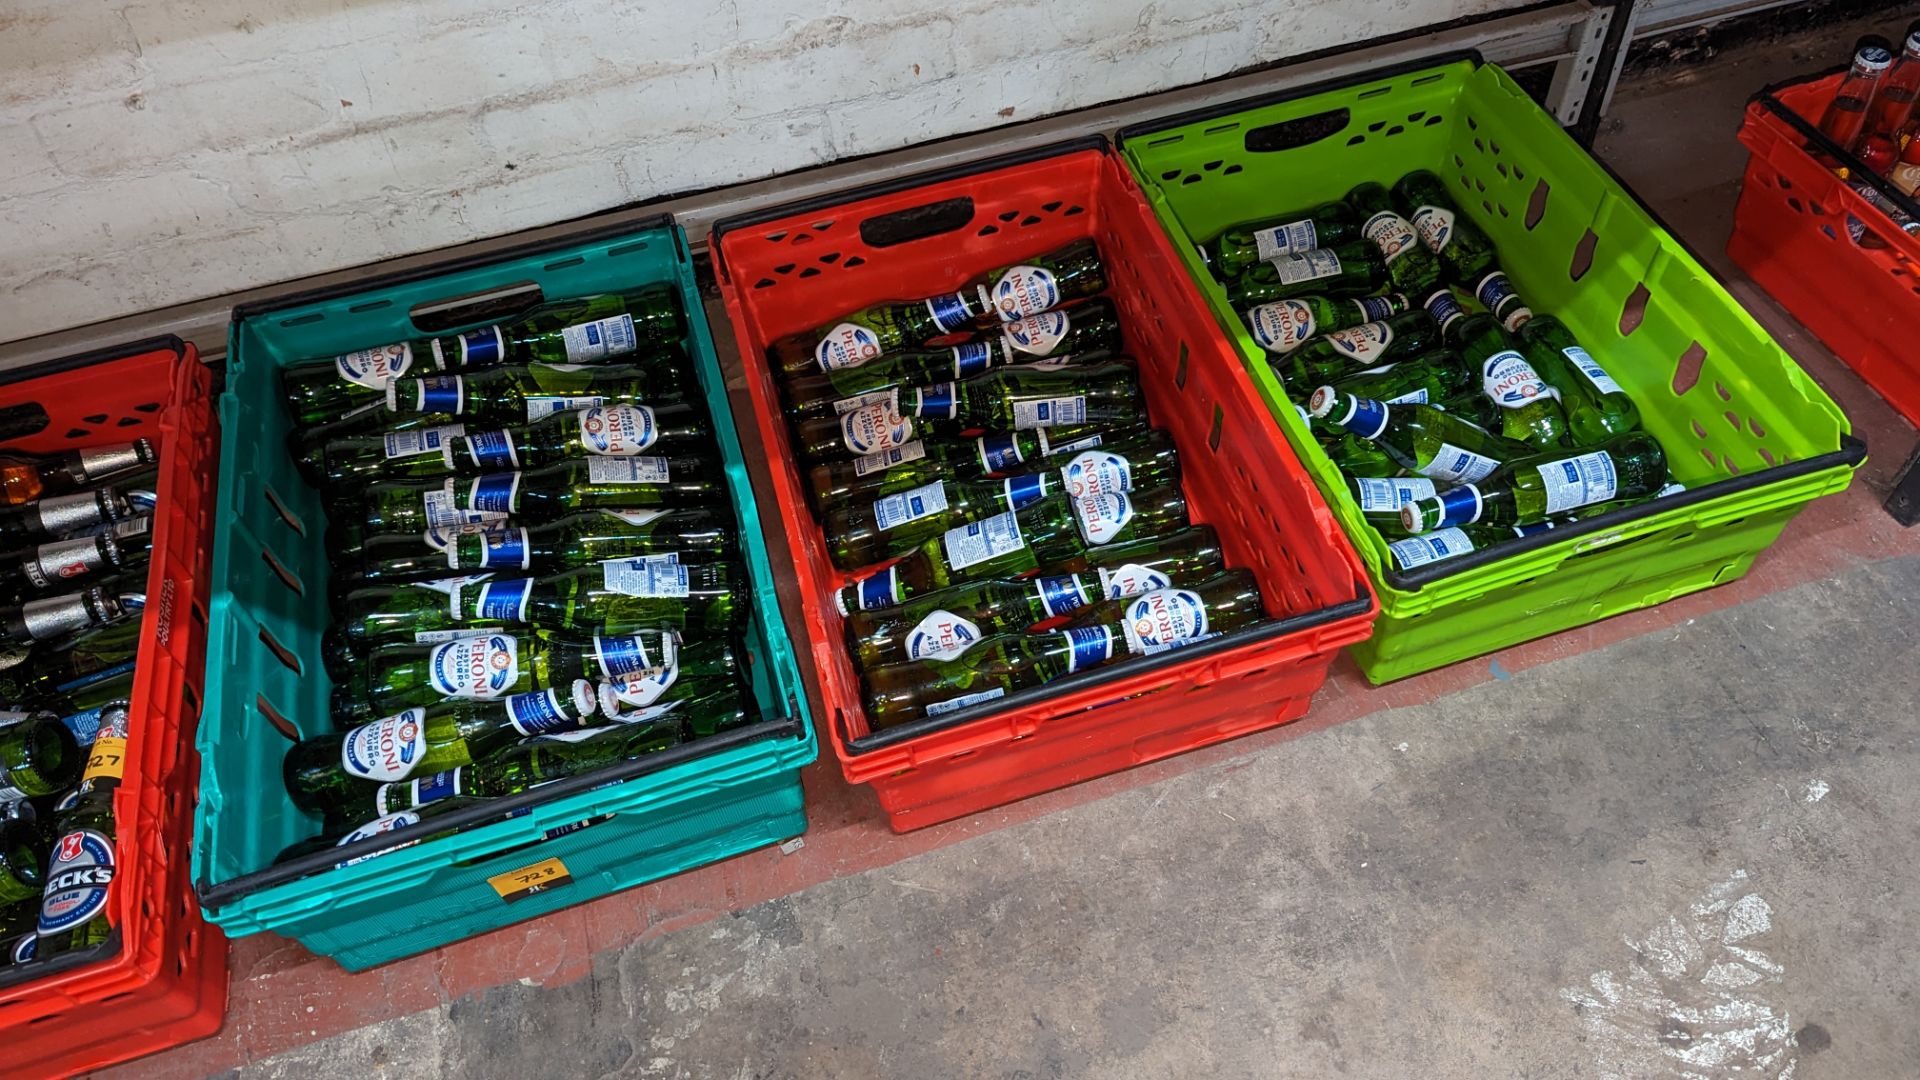 68 bottles of Peroni Nastro Azzurro beer (in 3 crates) sold under AWRS number XQAW00000101017